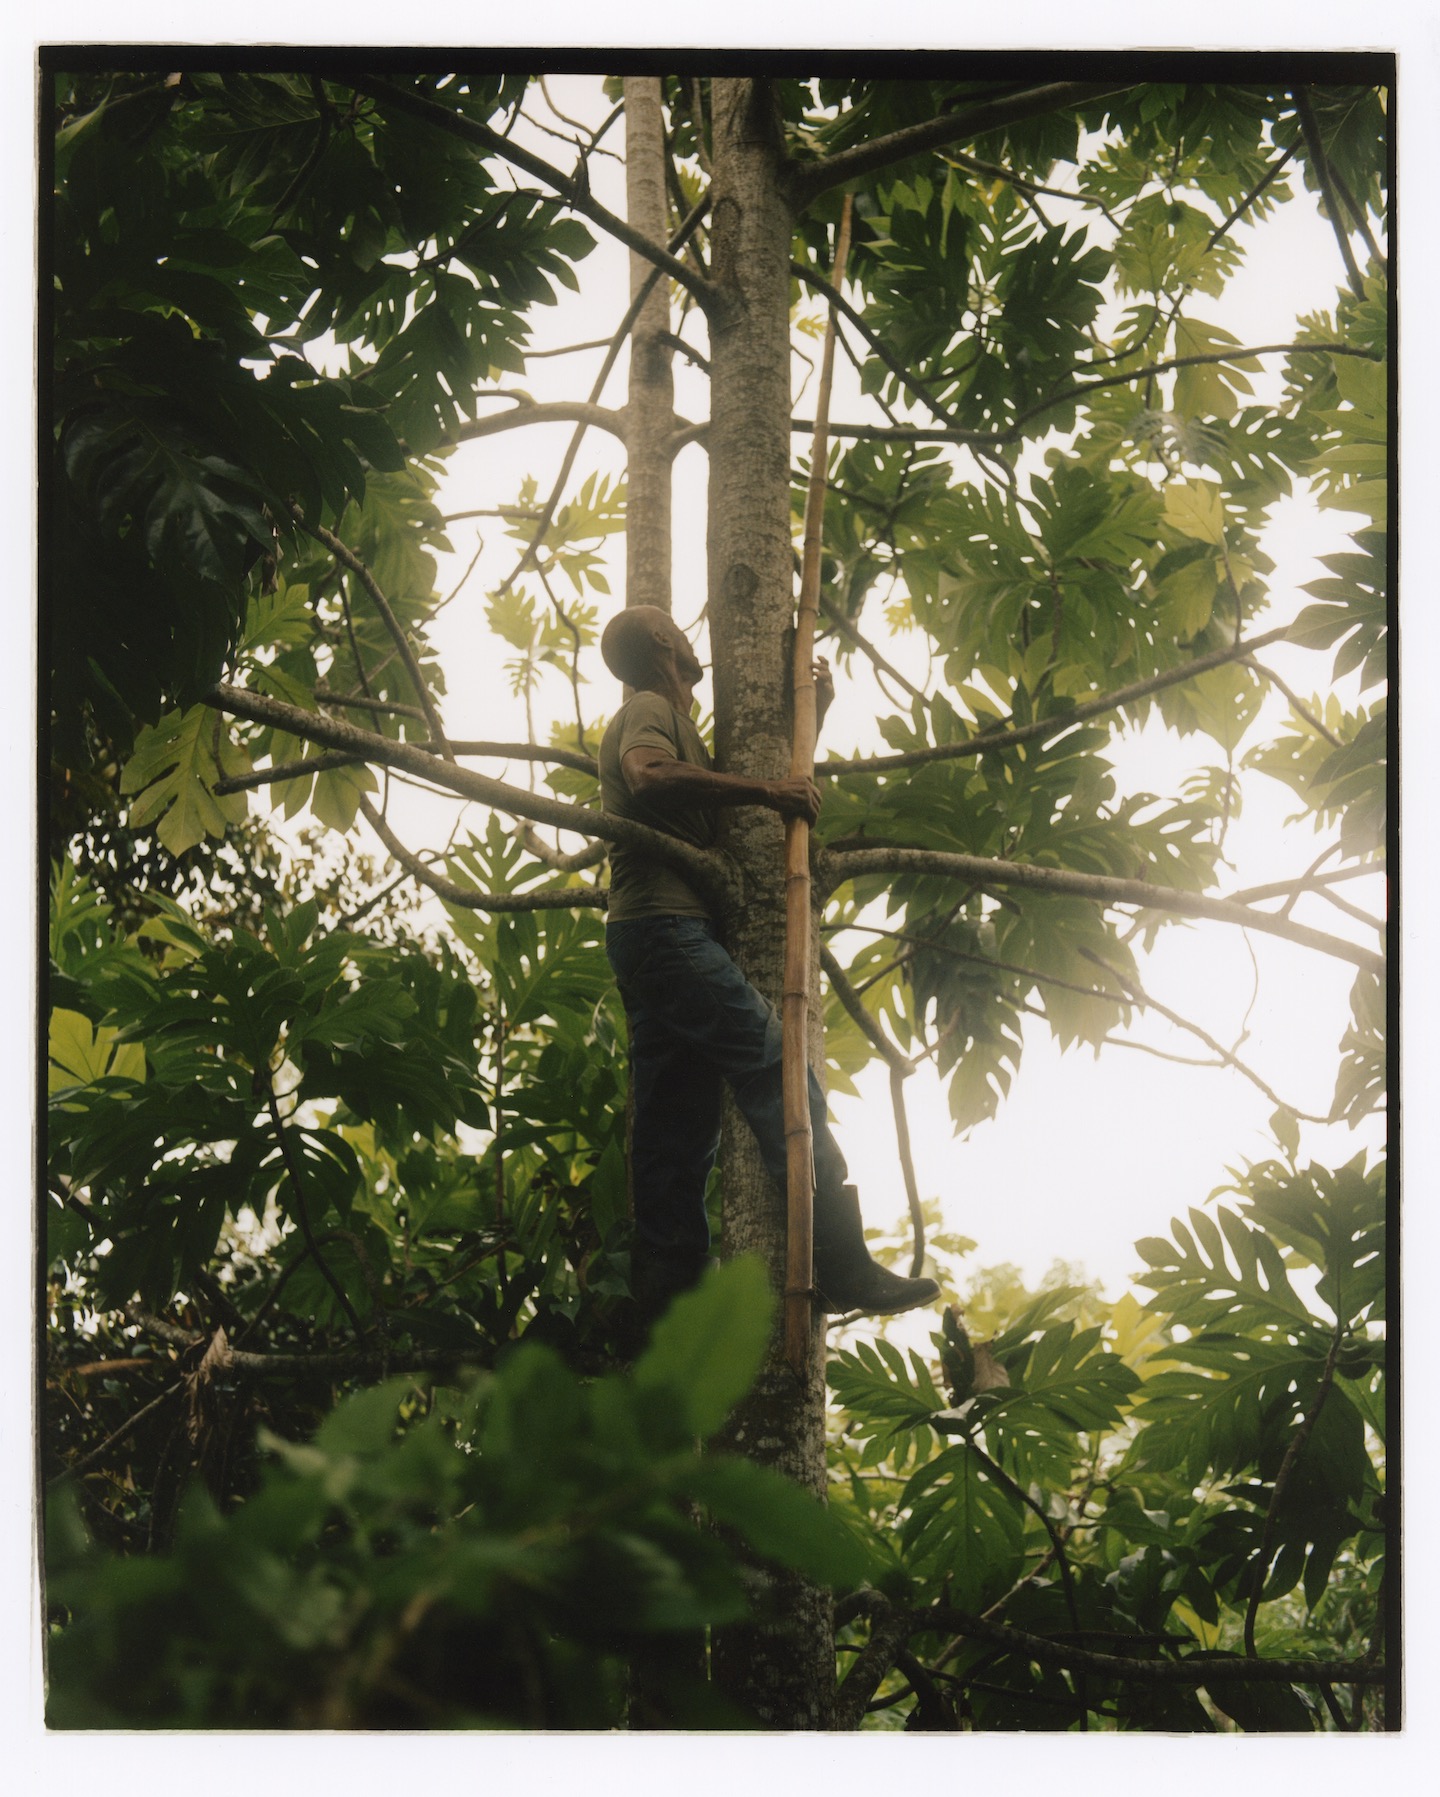 A man climbs a tree and pokes at something above him with a bamboo pole.